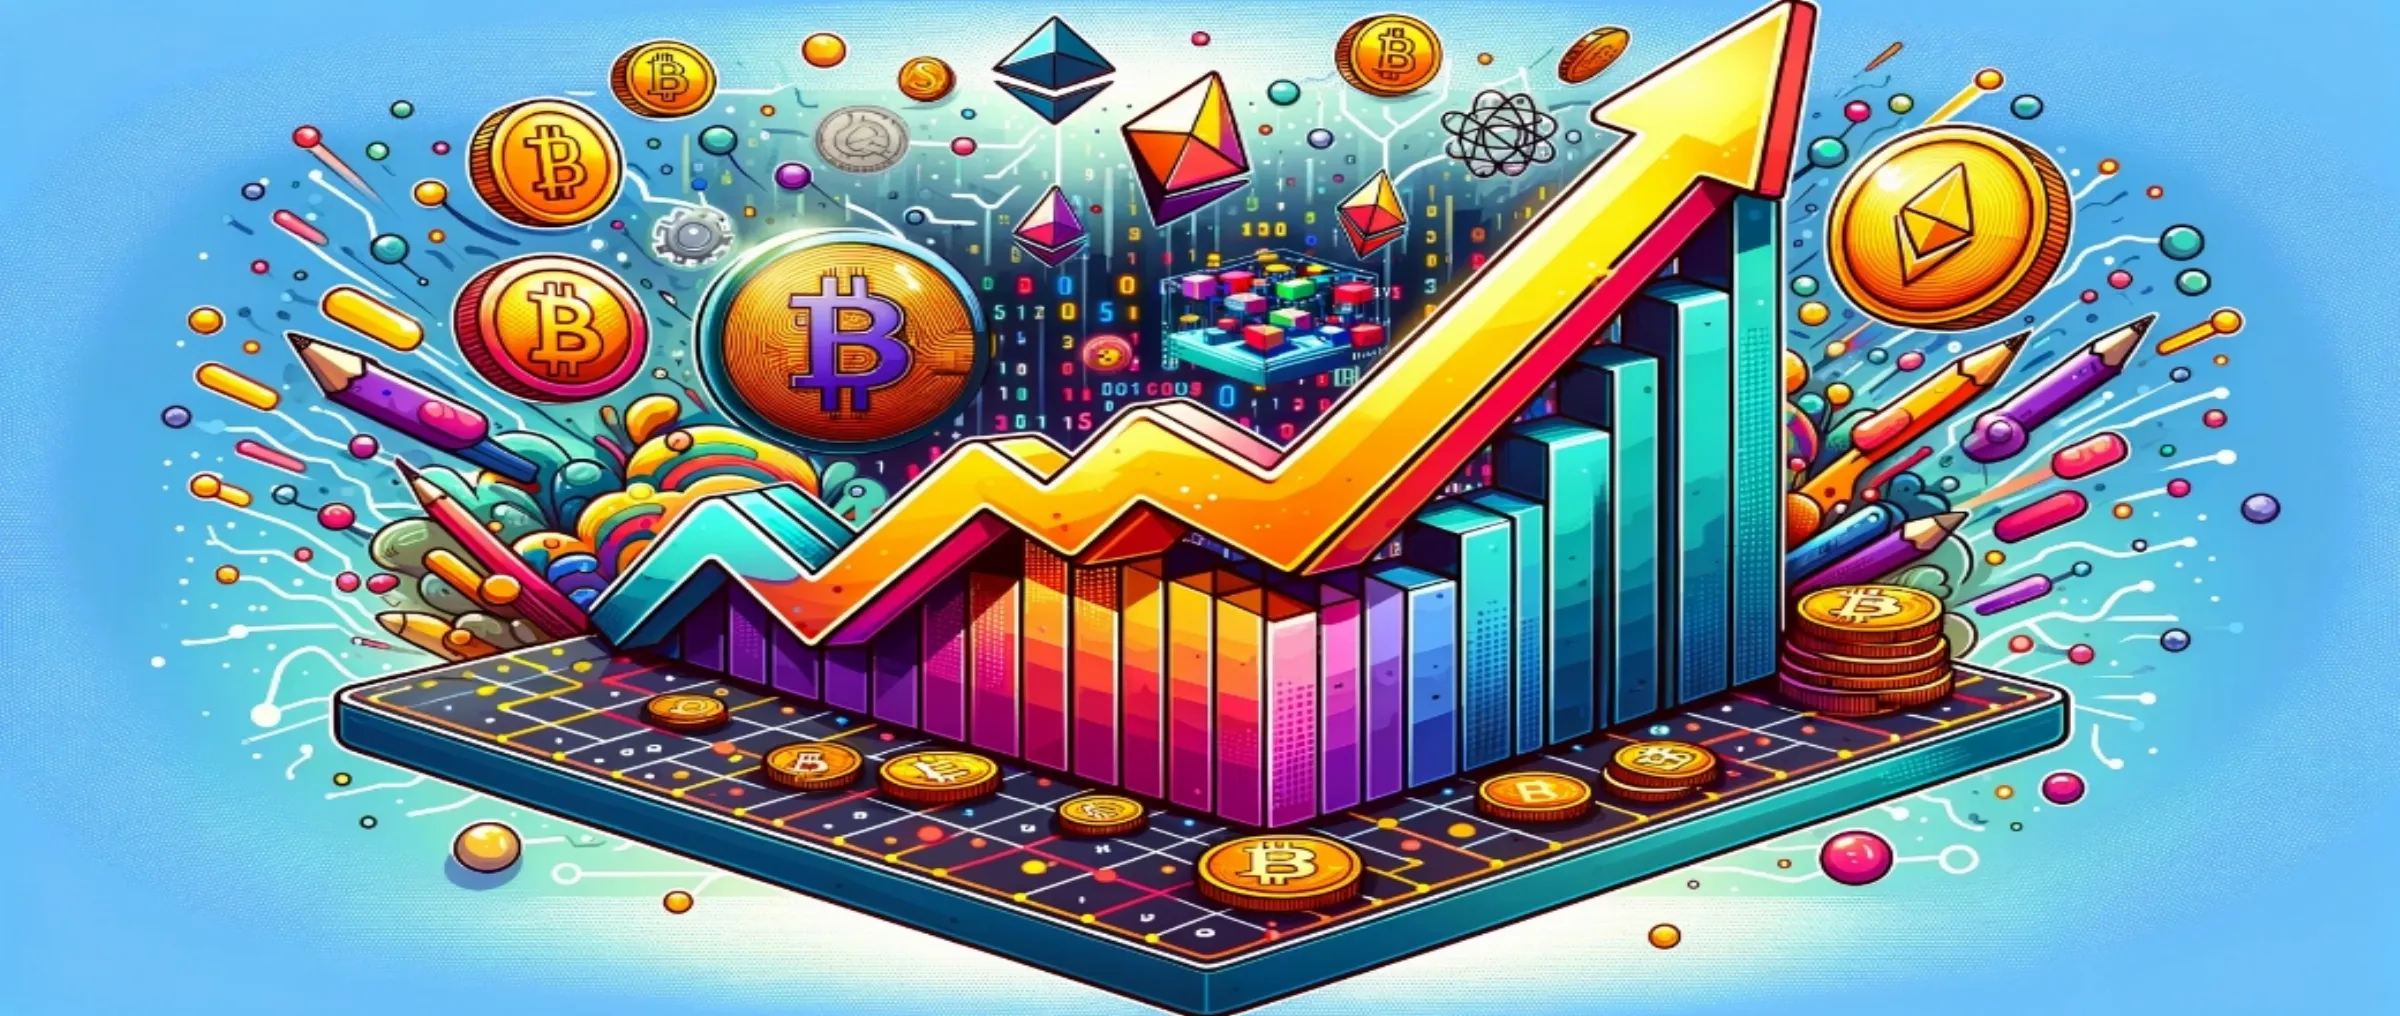 Cryptocurrency Trading Volume has Reached its highest Level in the last 12 months